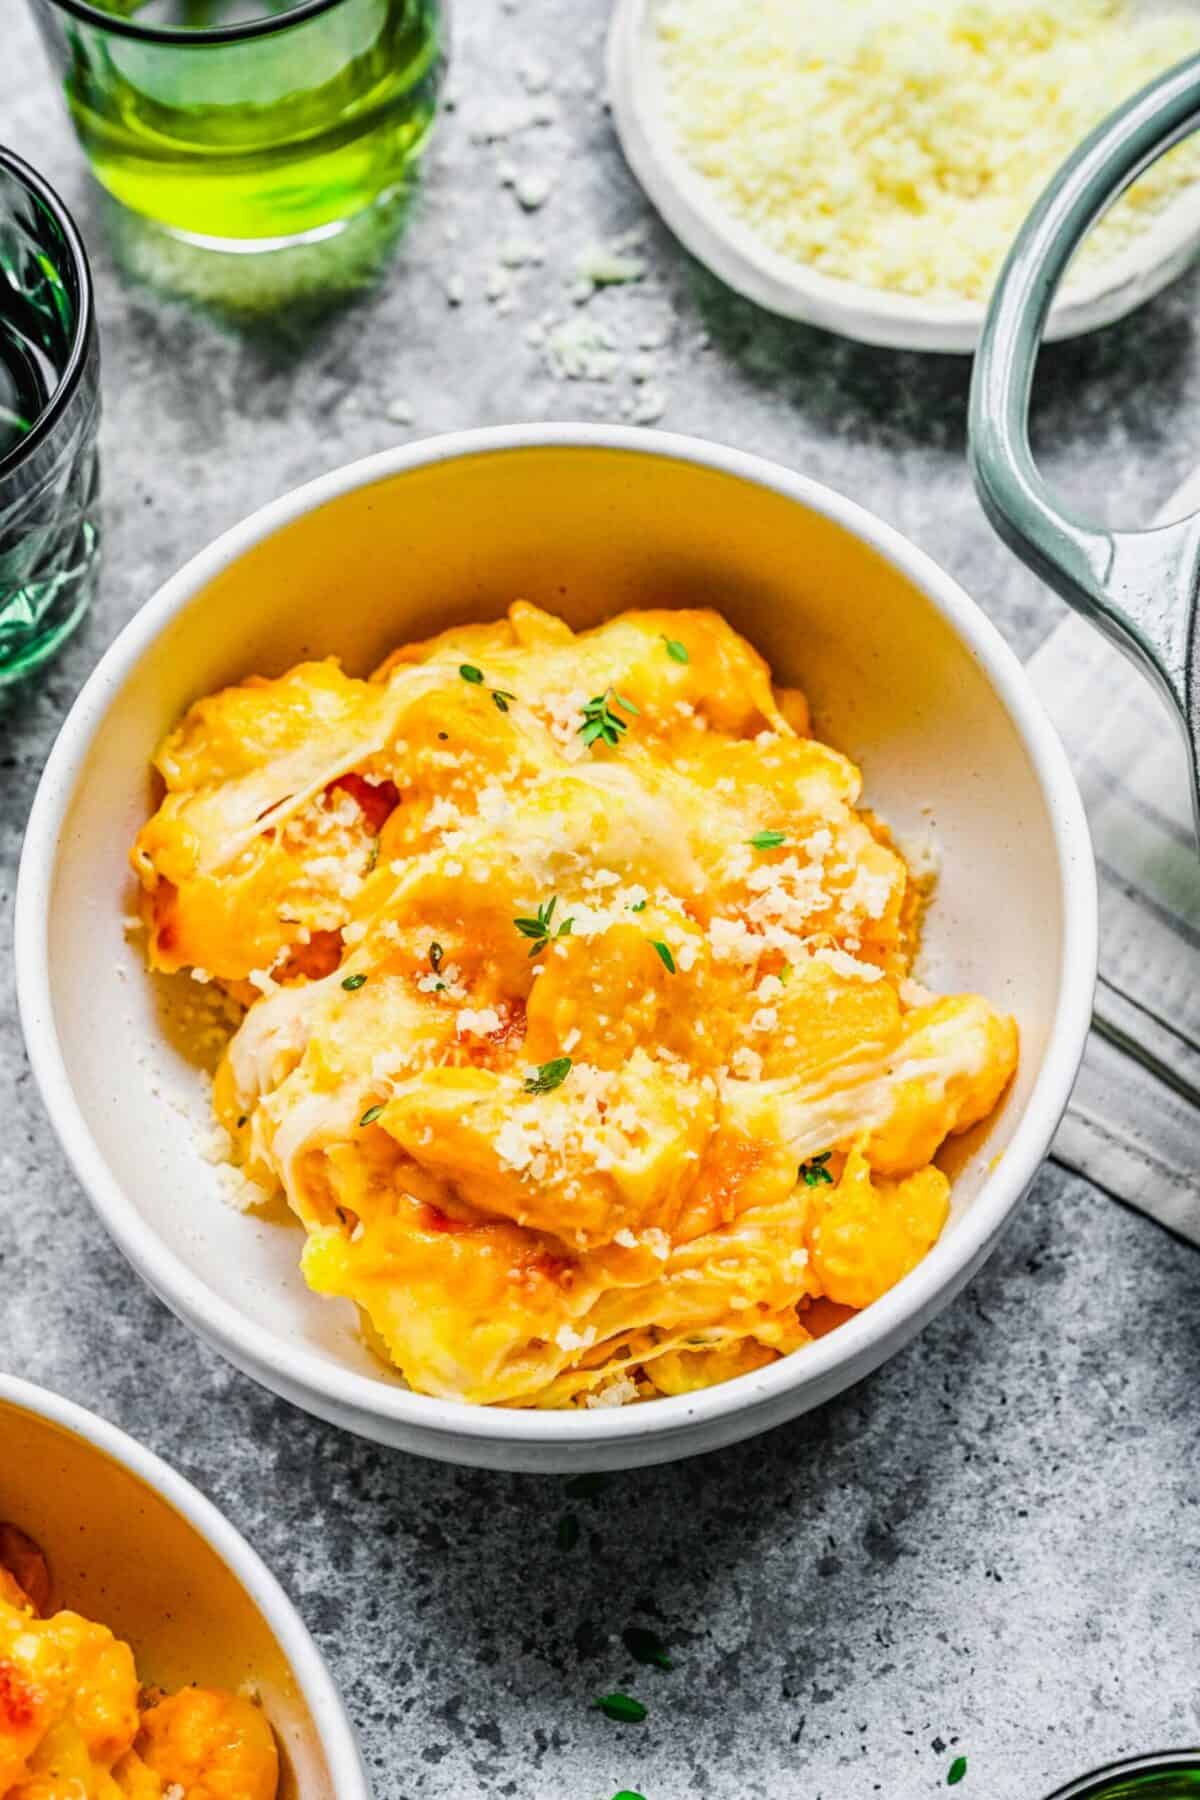 A bowl of baked pumpkin gnocchi topped with fresh thyme, next to another bowl of baked gnocchi and a bowl of shredded parmesan